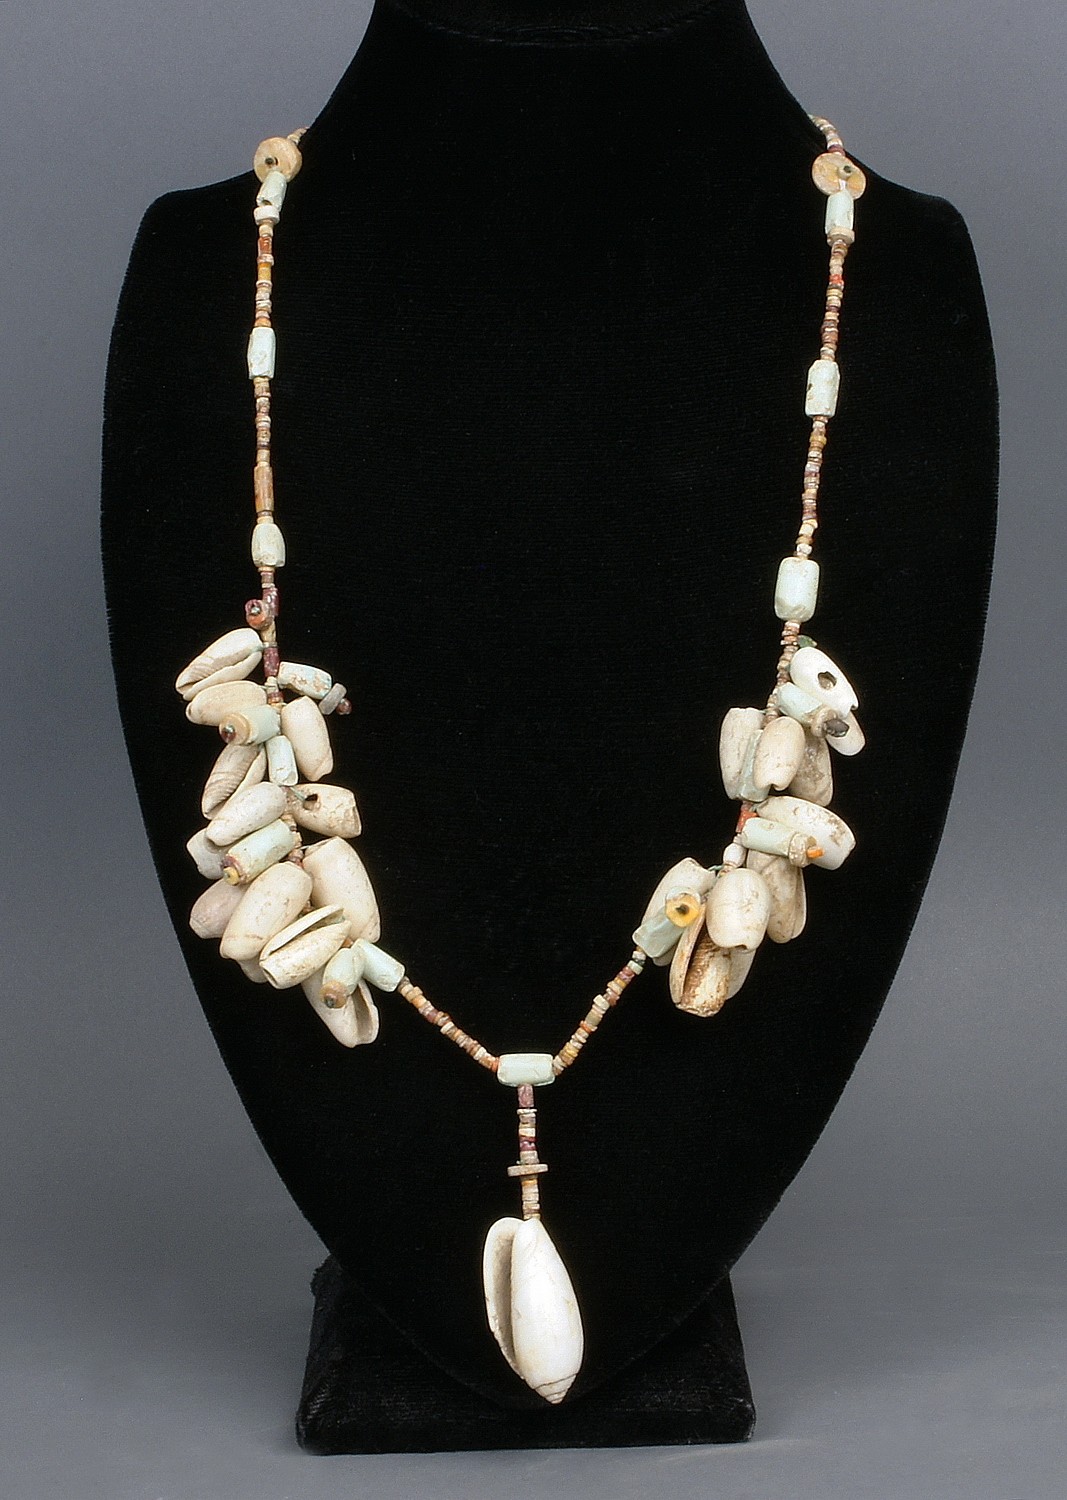 Dominican Republic, TaÃ­no Stone and Shell Necklace with a Contemporary Stringing
This necklace has an assortment of stone and shell beads put together to give the viewer a sense of what ancient TaÃ­no necklaces would have looked like as worn by chiefs. Only chiefs were allowed to wear necklaces of stone beads, which are featured in the creation story documented by Columbus' missionary, Fra Ramon Pane'.
Media: Shell
$1,800
99375